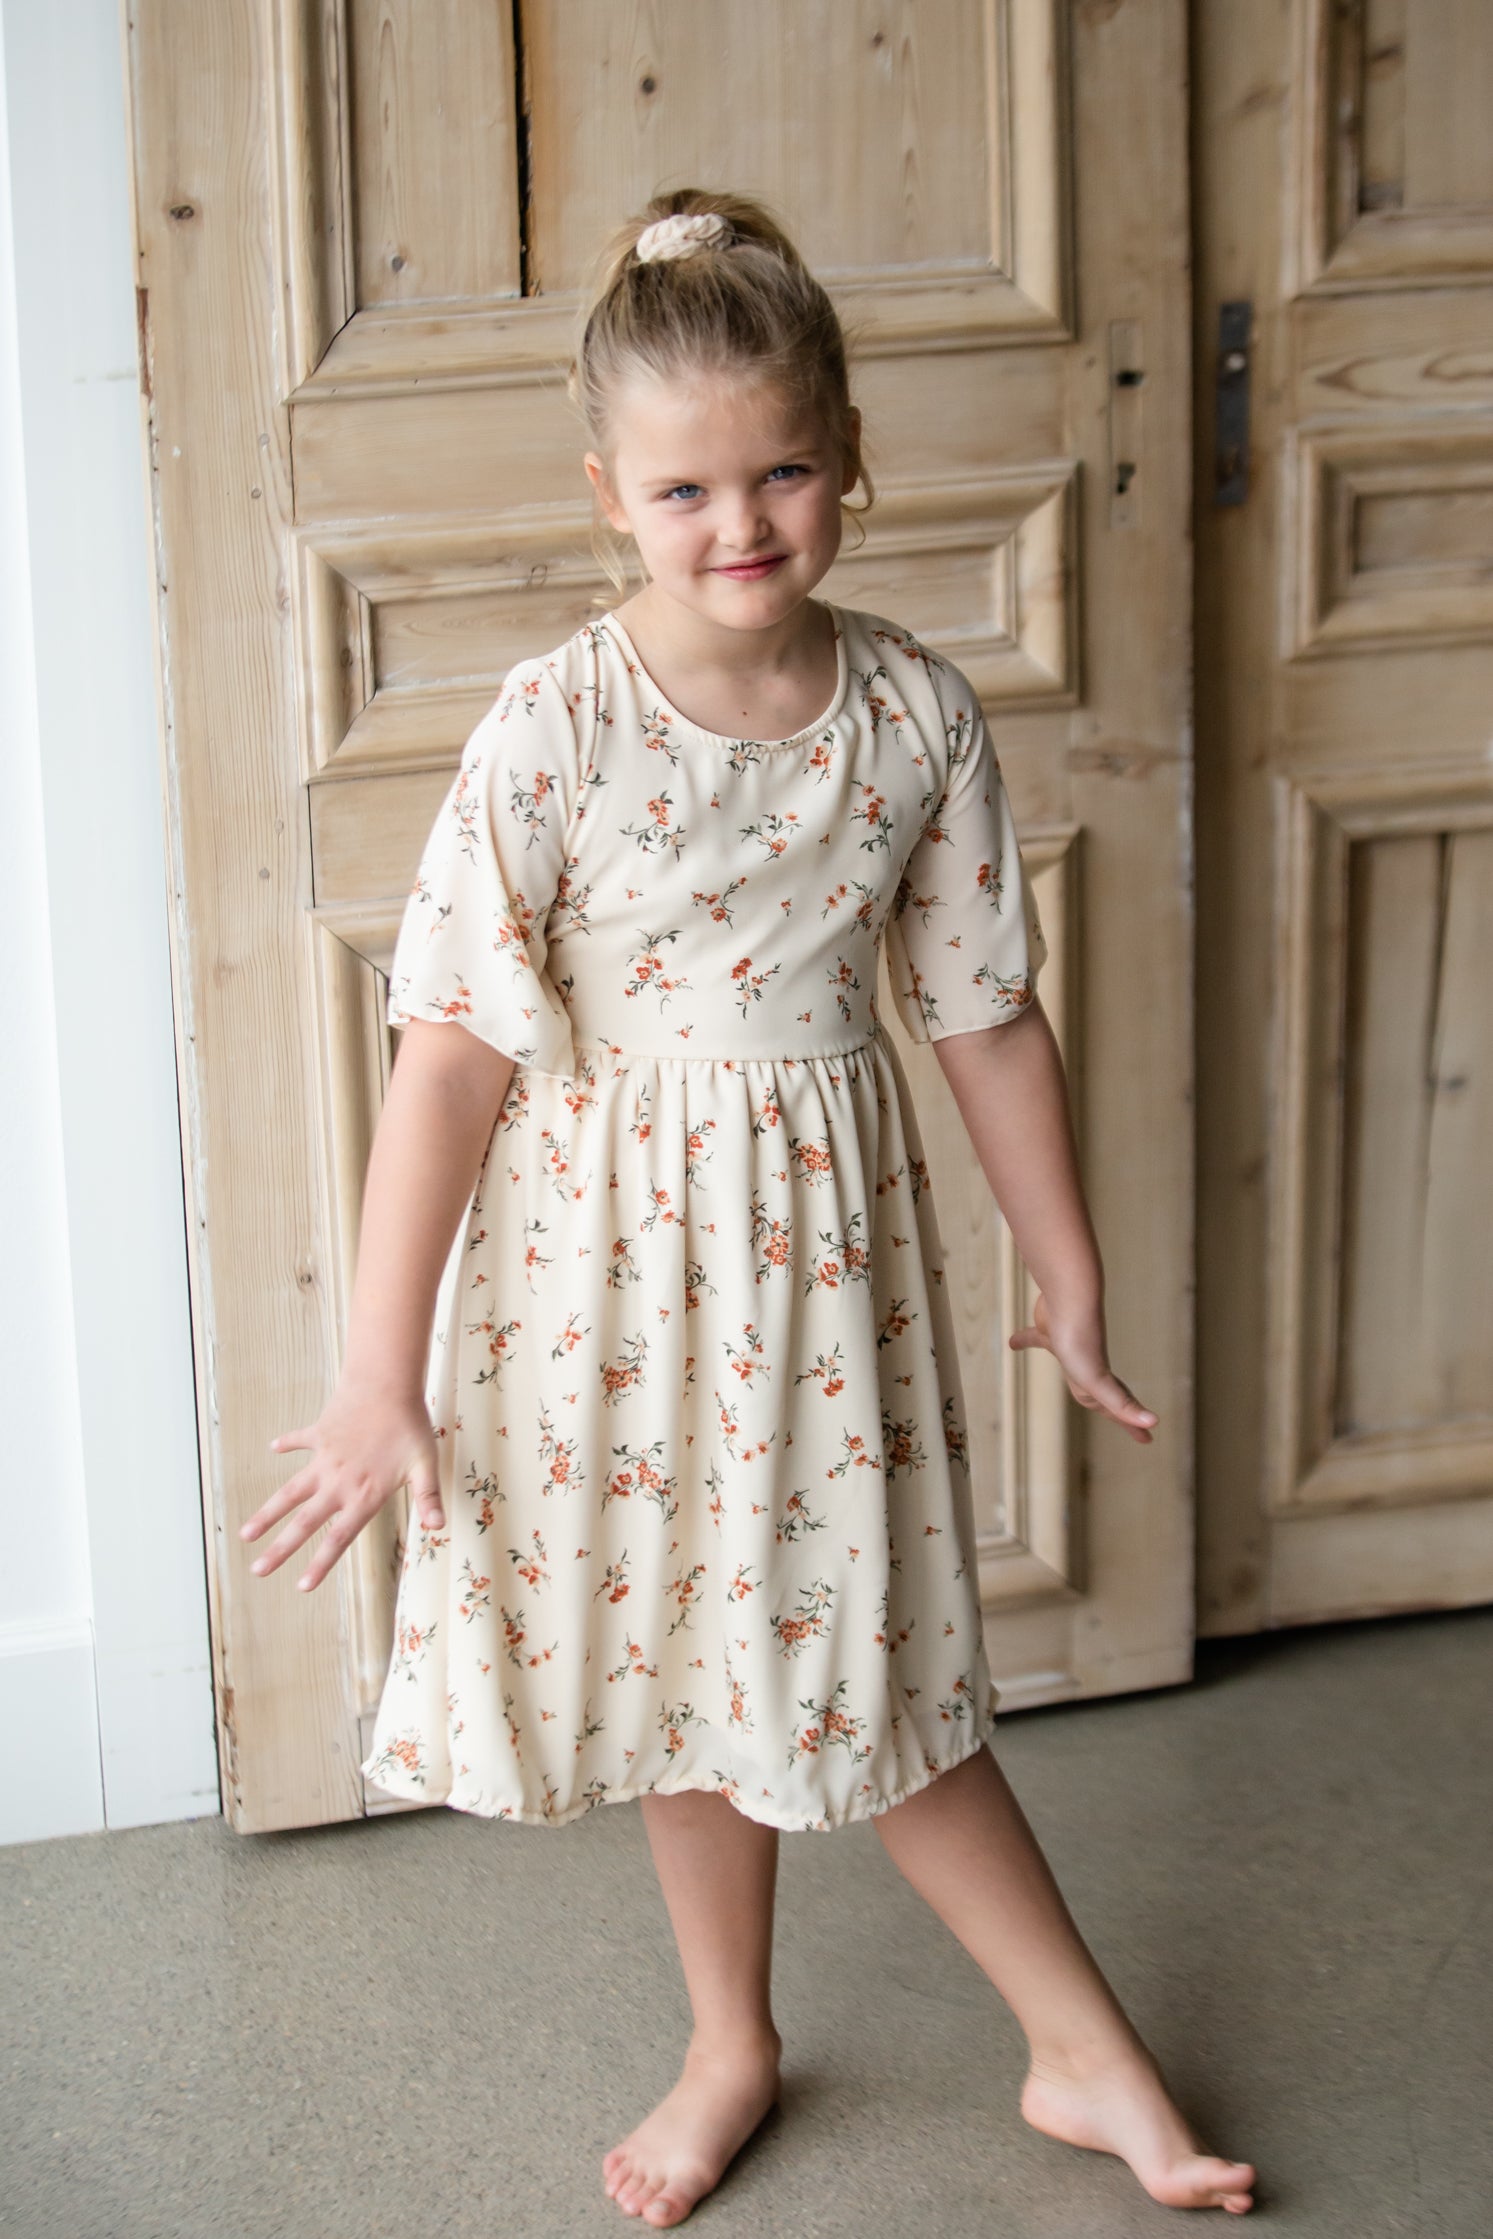 The Floral Print Girls Dress Girls Woodmouse + Thistle